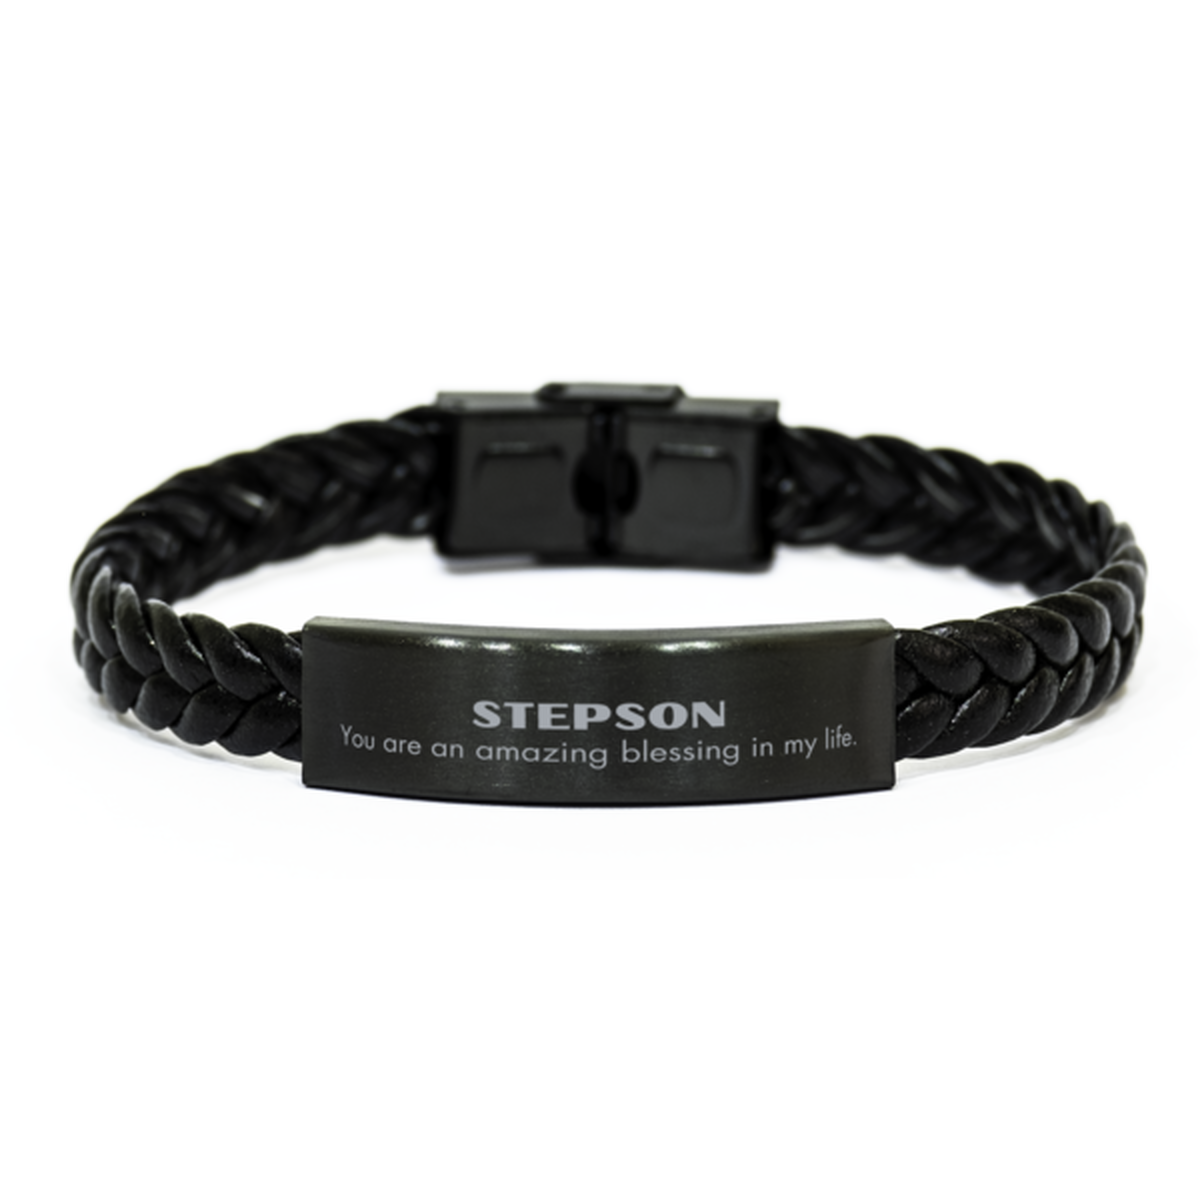 Stepson Braided Leather Bracelet, You are an amazing blessing in my life, Thank You Gifts For Stepson, Inspirational Birthday Christmas Unique Gifts For Stepson